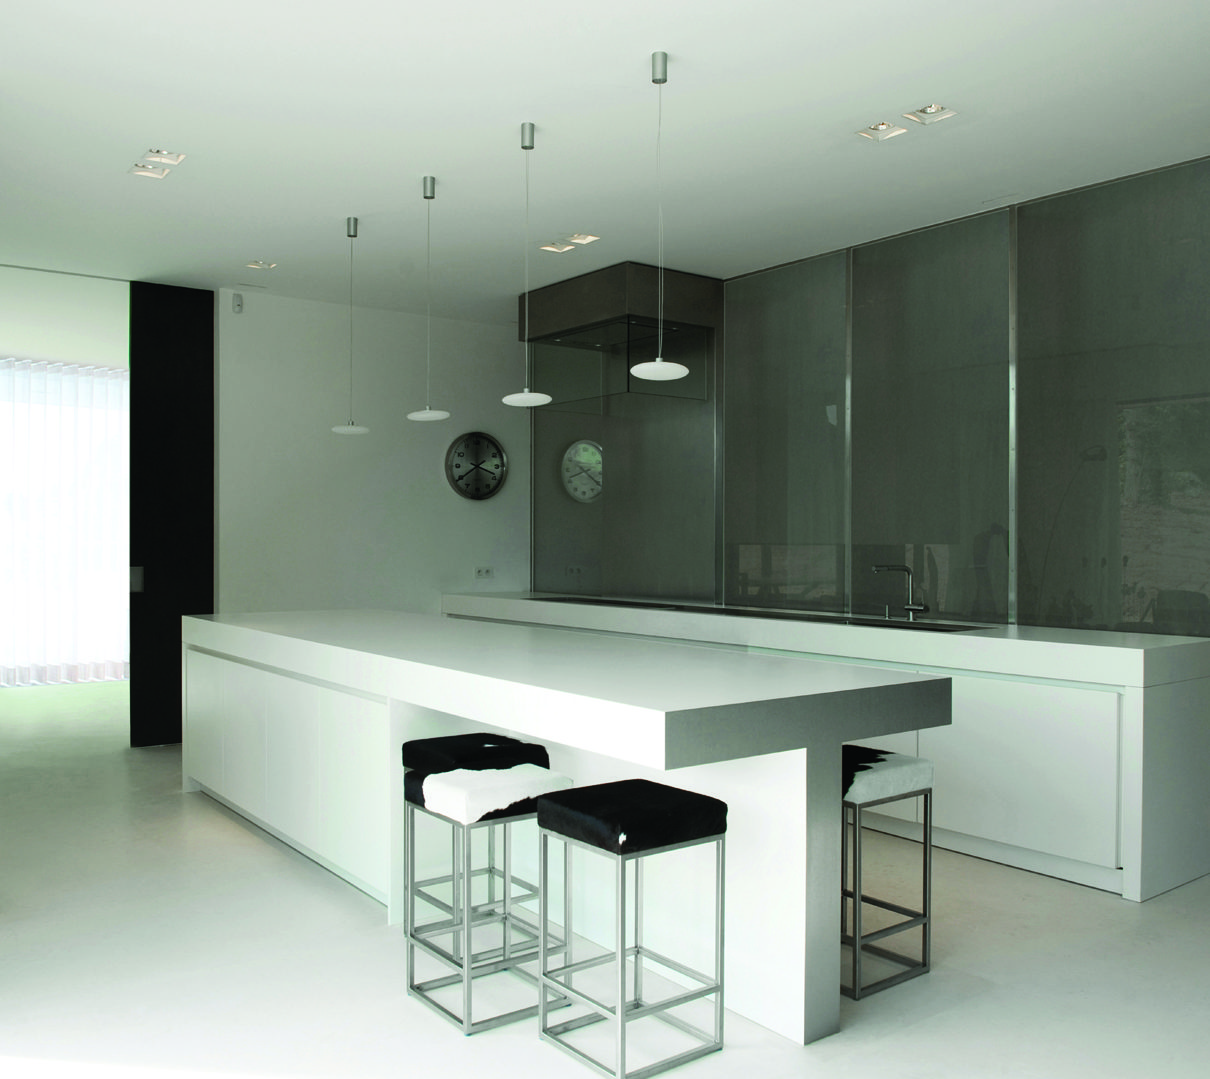 Strato_design_Igloo_bespoke kitchen design in Paris_mat stainless steel_glass_stratocolor white_13